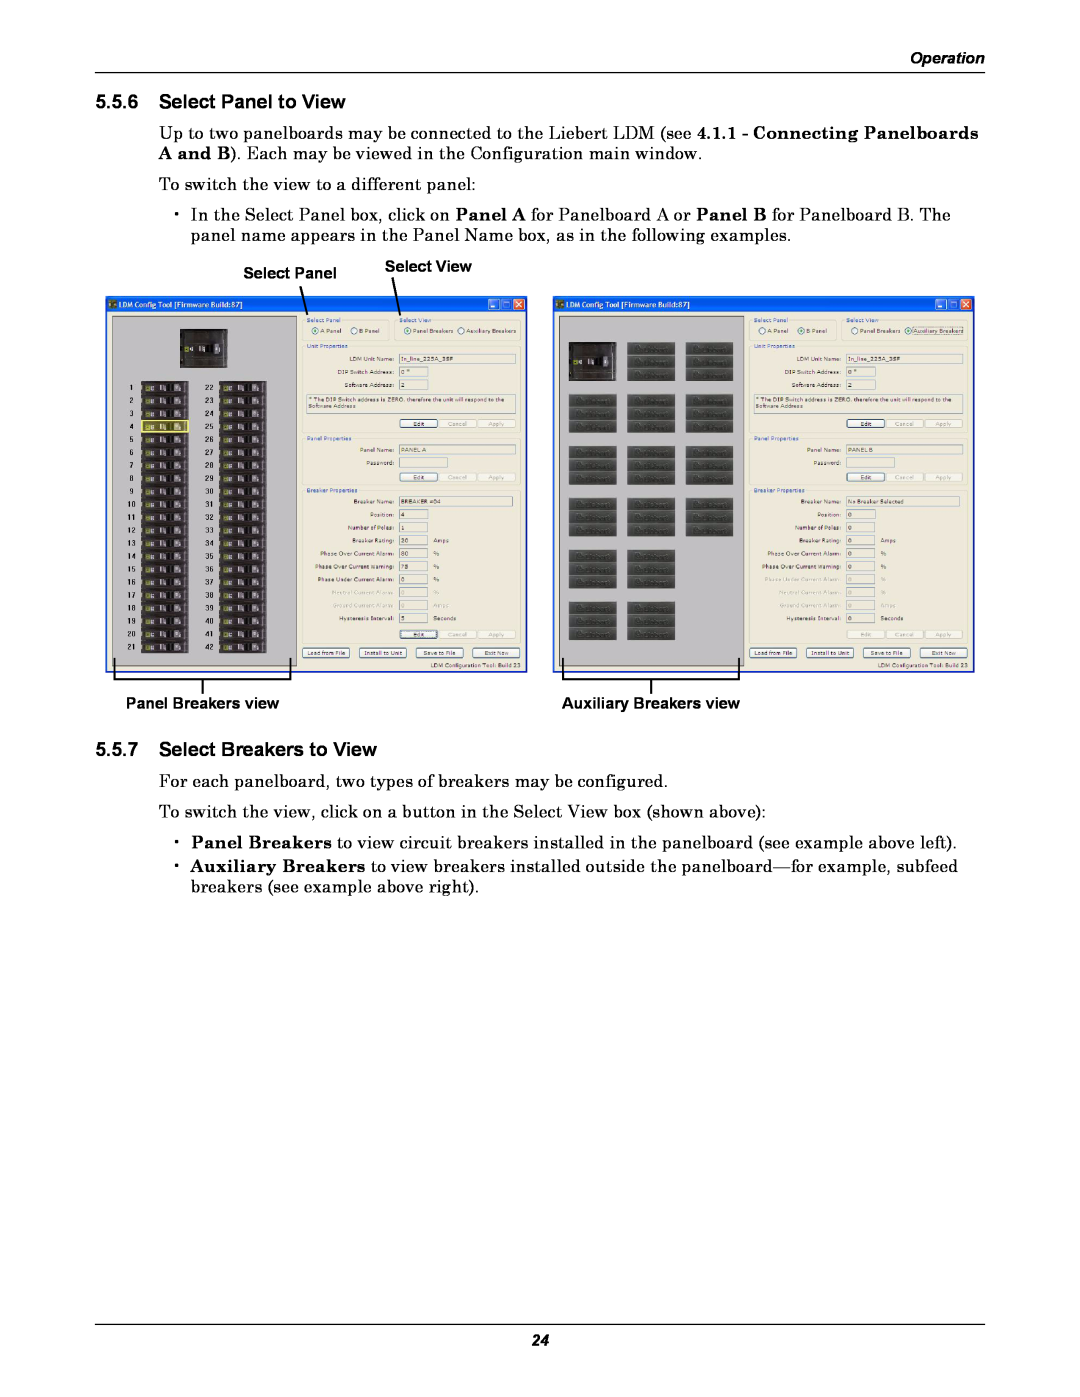 Liebert LDM user manual Select Panel to View, Select Breakers to View 